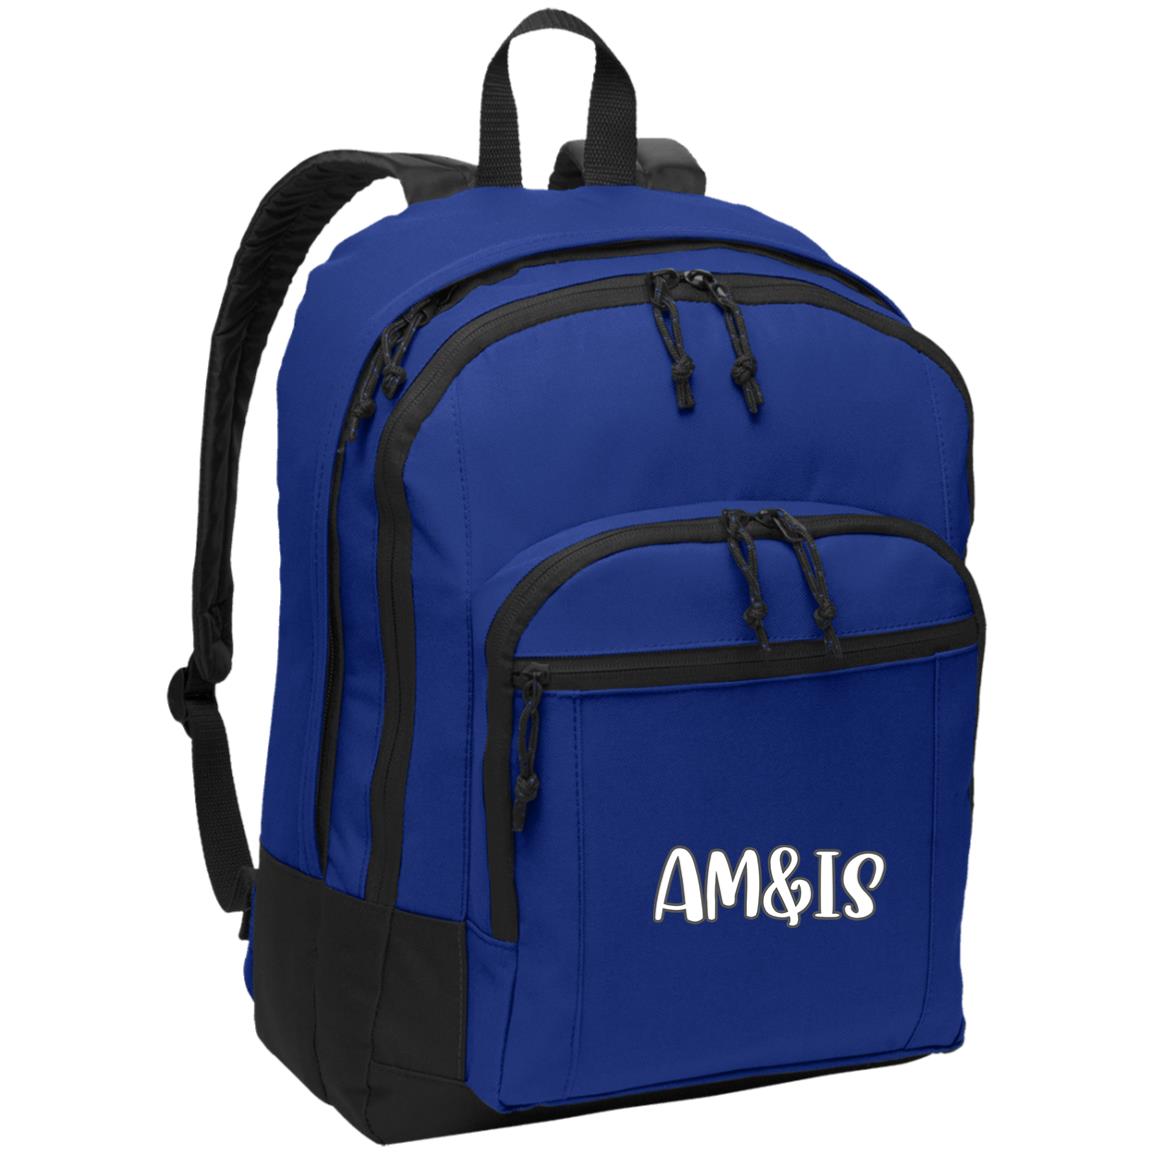 TWILIGHT BLUE ONE SIZE AM&IS Basic Backpack - Backpacks at TFC&H Co.